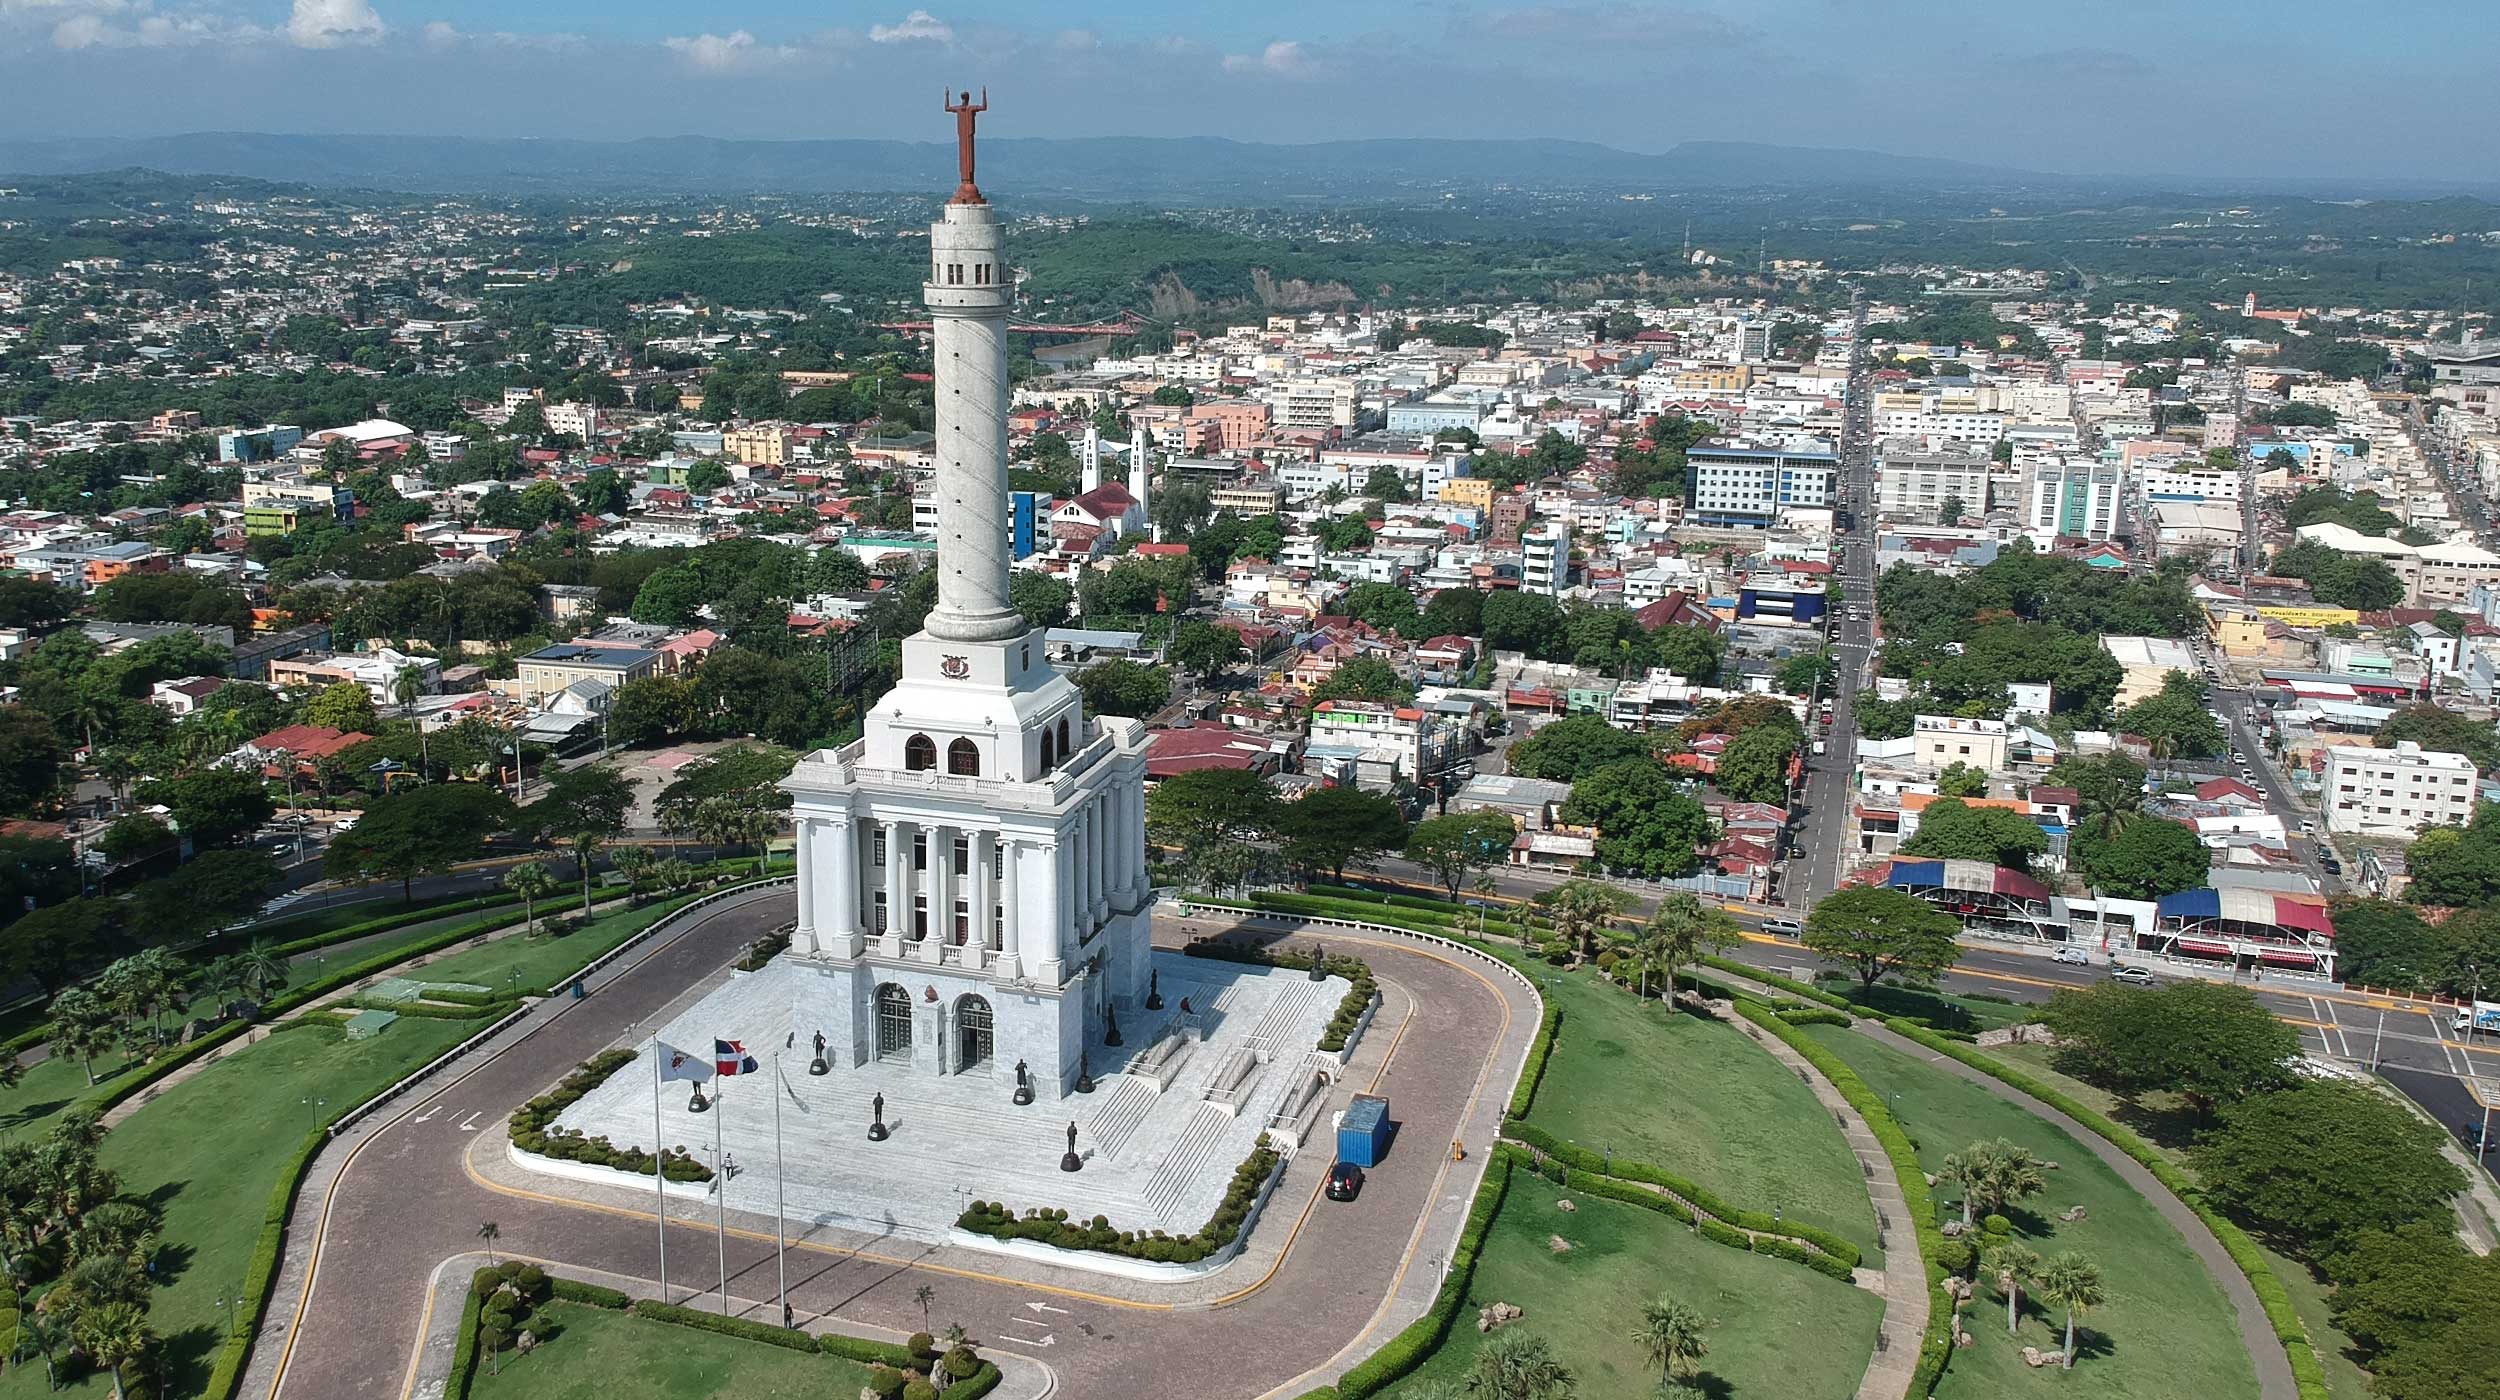 Aerial view of the monument to the Heroes of the Restoration and city of Santiago.